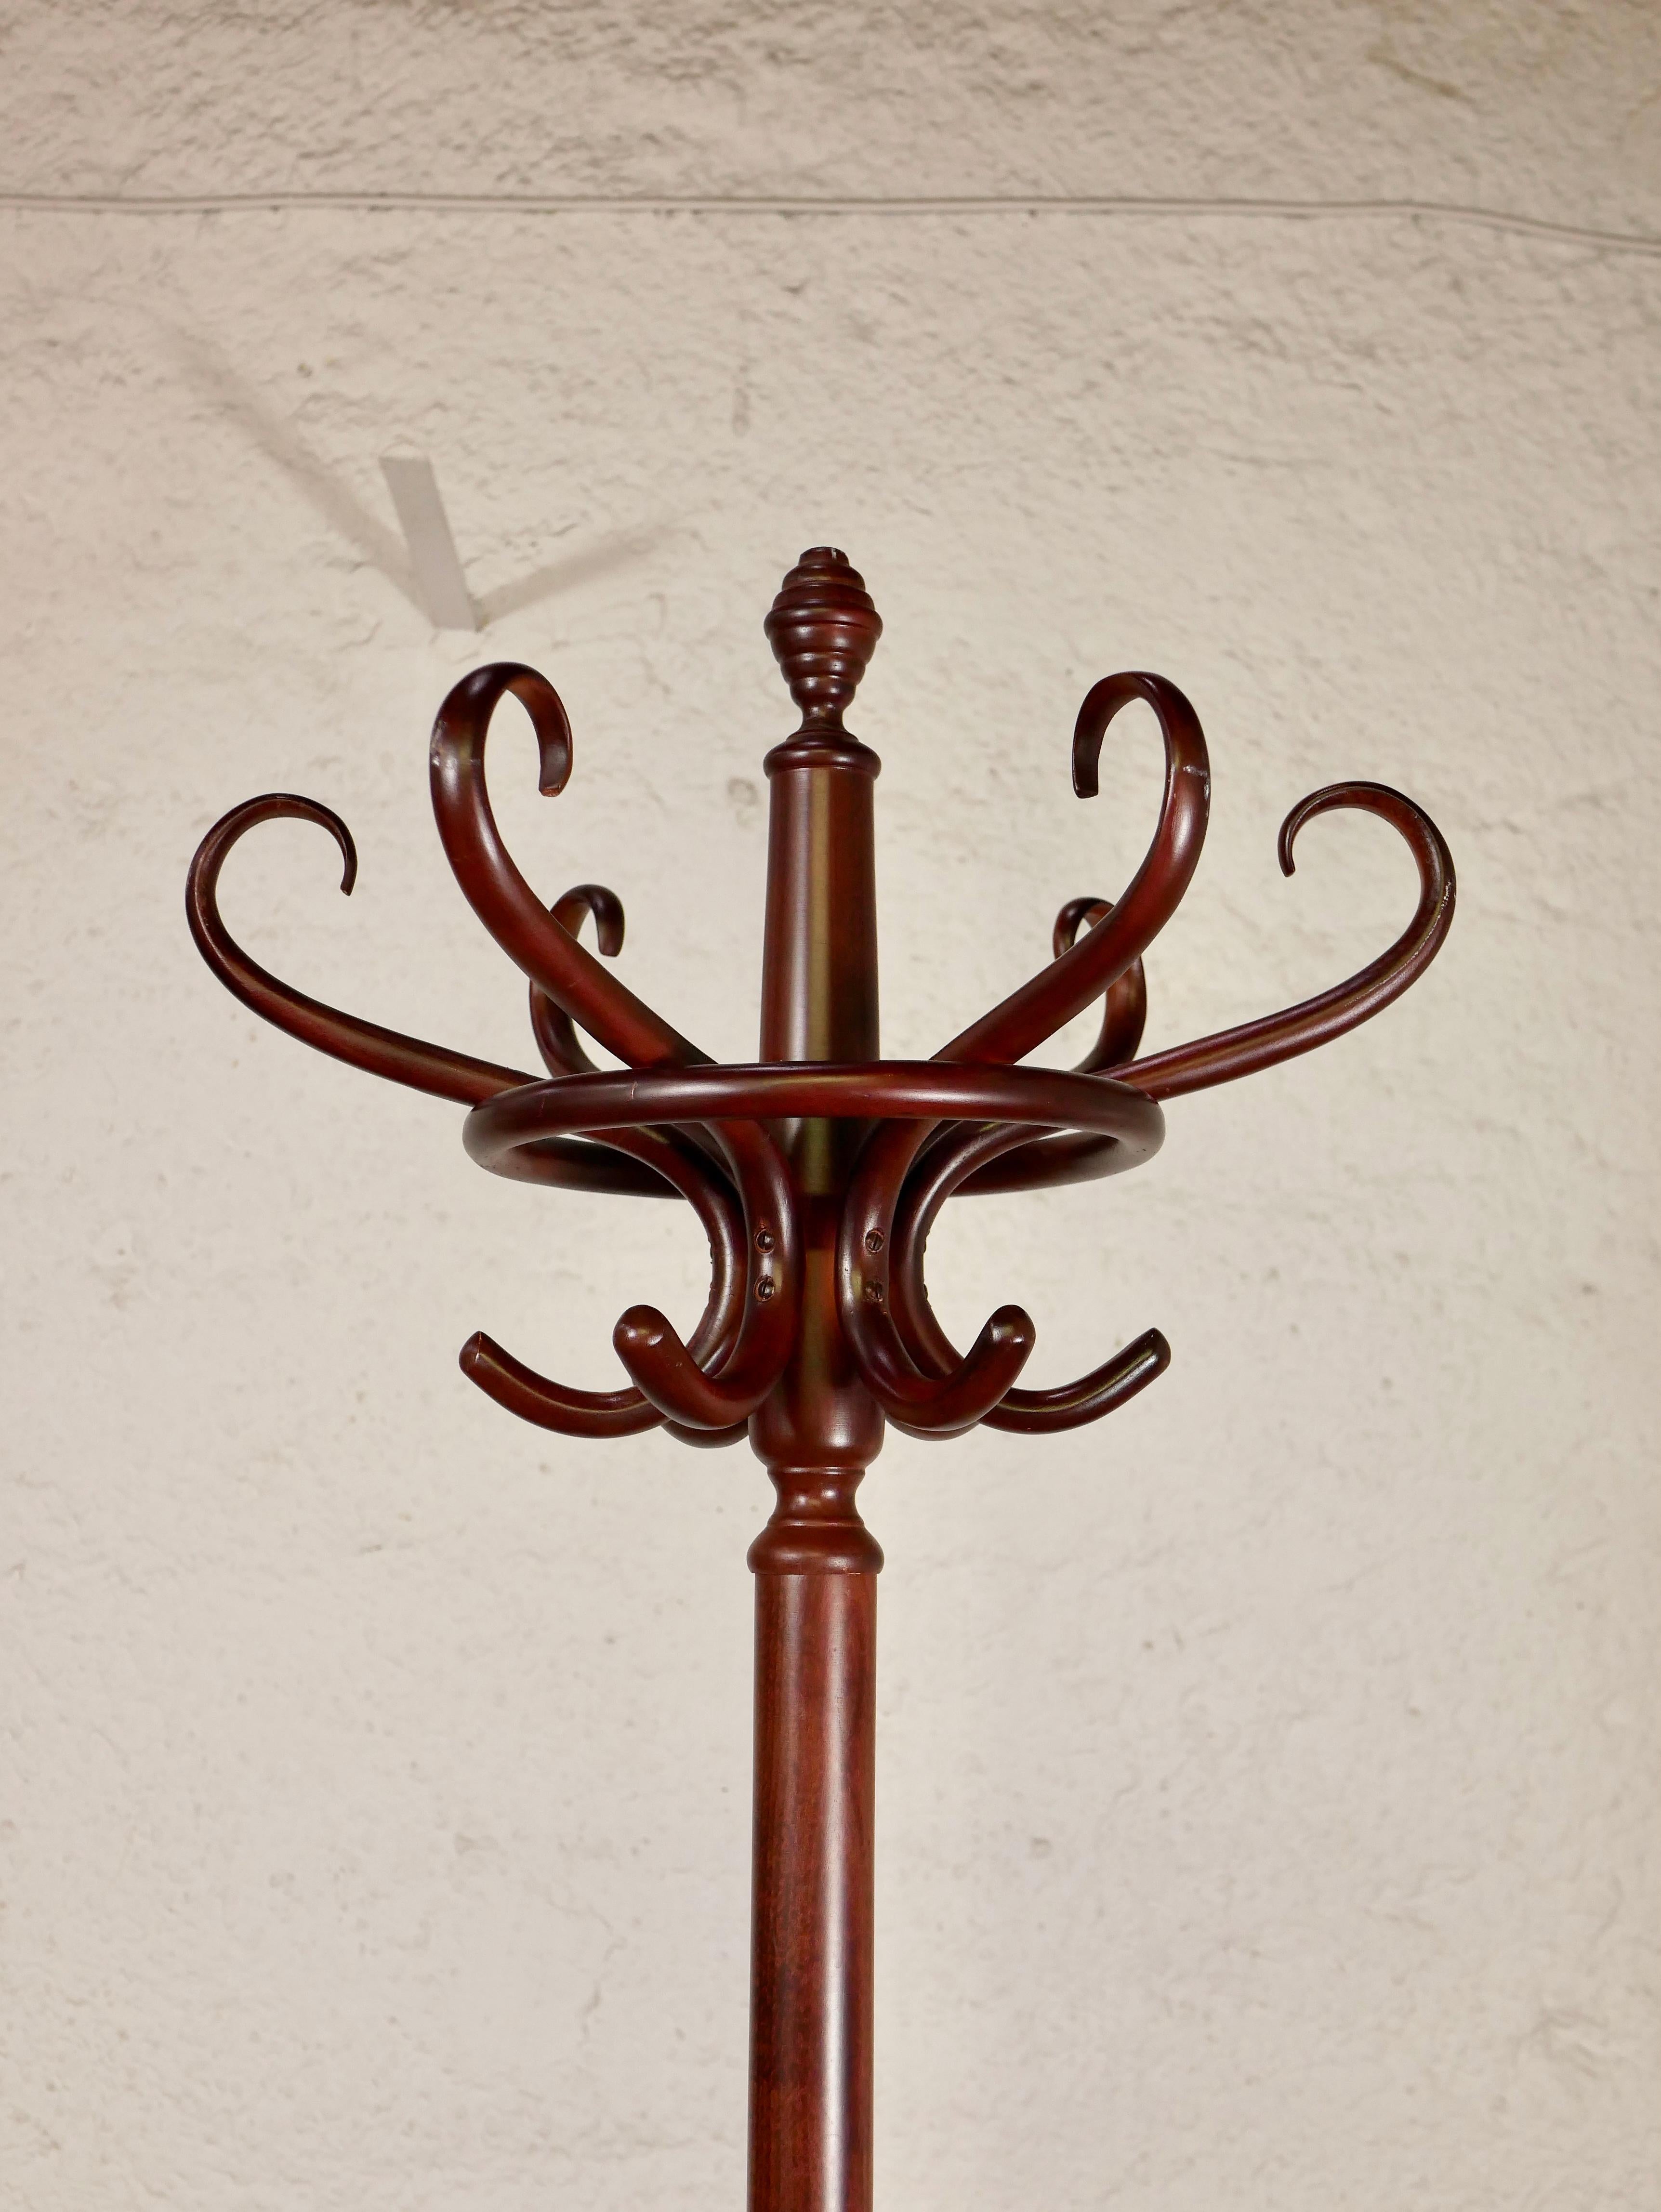 Gorgeous parrot coat stand by Thonet, made in the first Polish factory of the manufacturer, in Radomsko, during the 1950s.
An iconic European design, very bistrot-like, you can find these parrot coat rack in a lot of traditional restaurants in